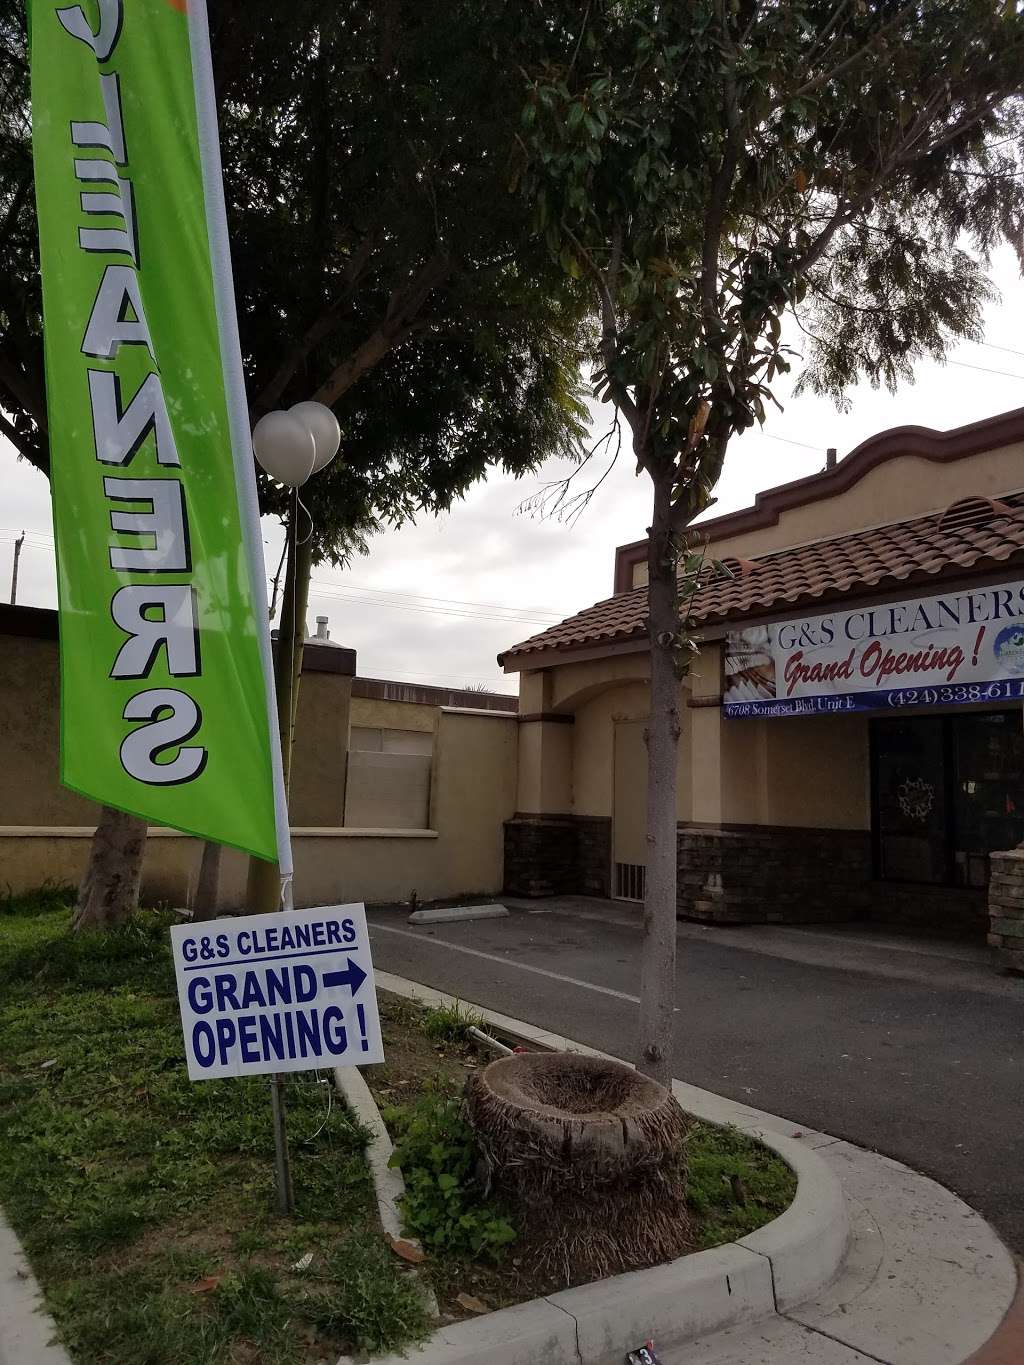 G & S Cleaners | 6708 Somerset Blvd Unit E, Paramount, CA 90723 | Phone: (424) 338-6113